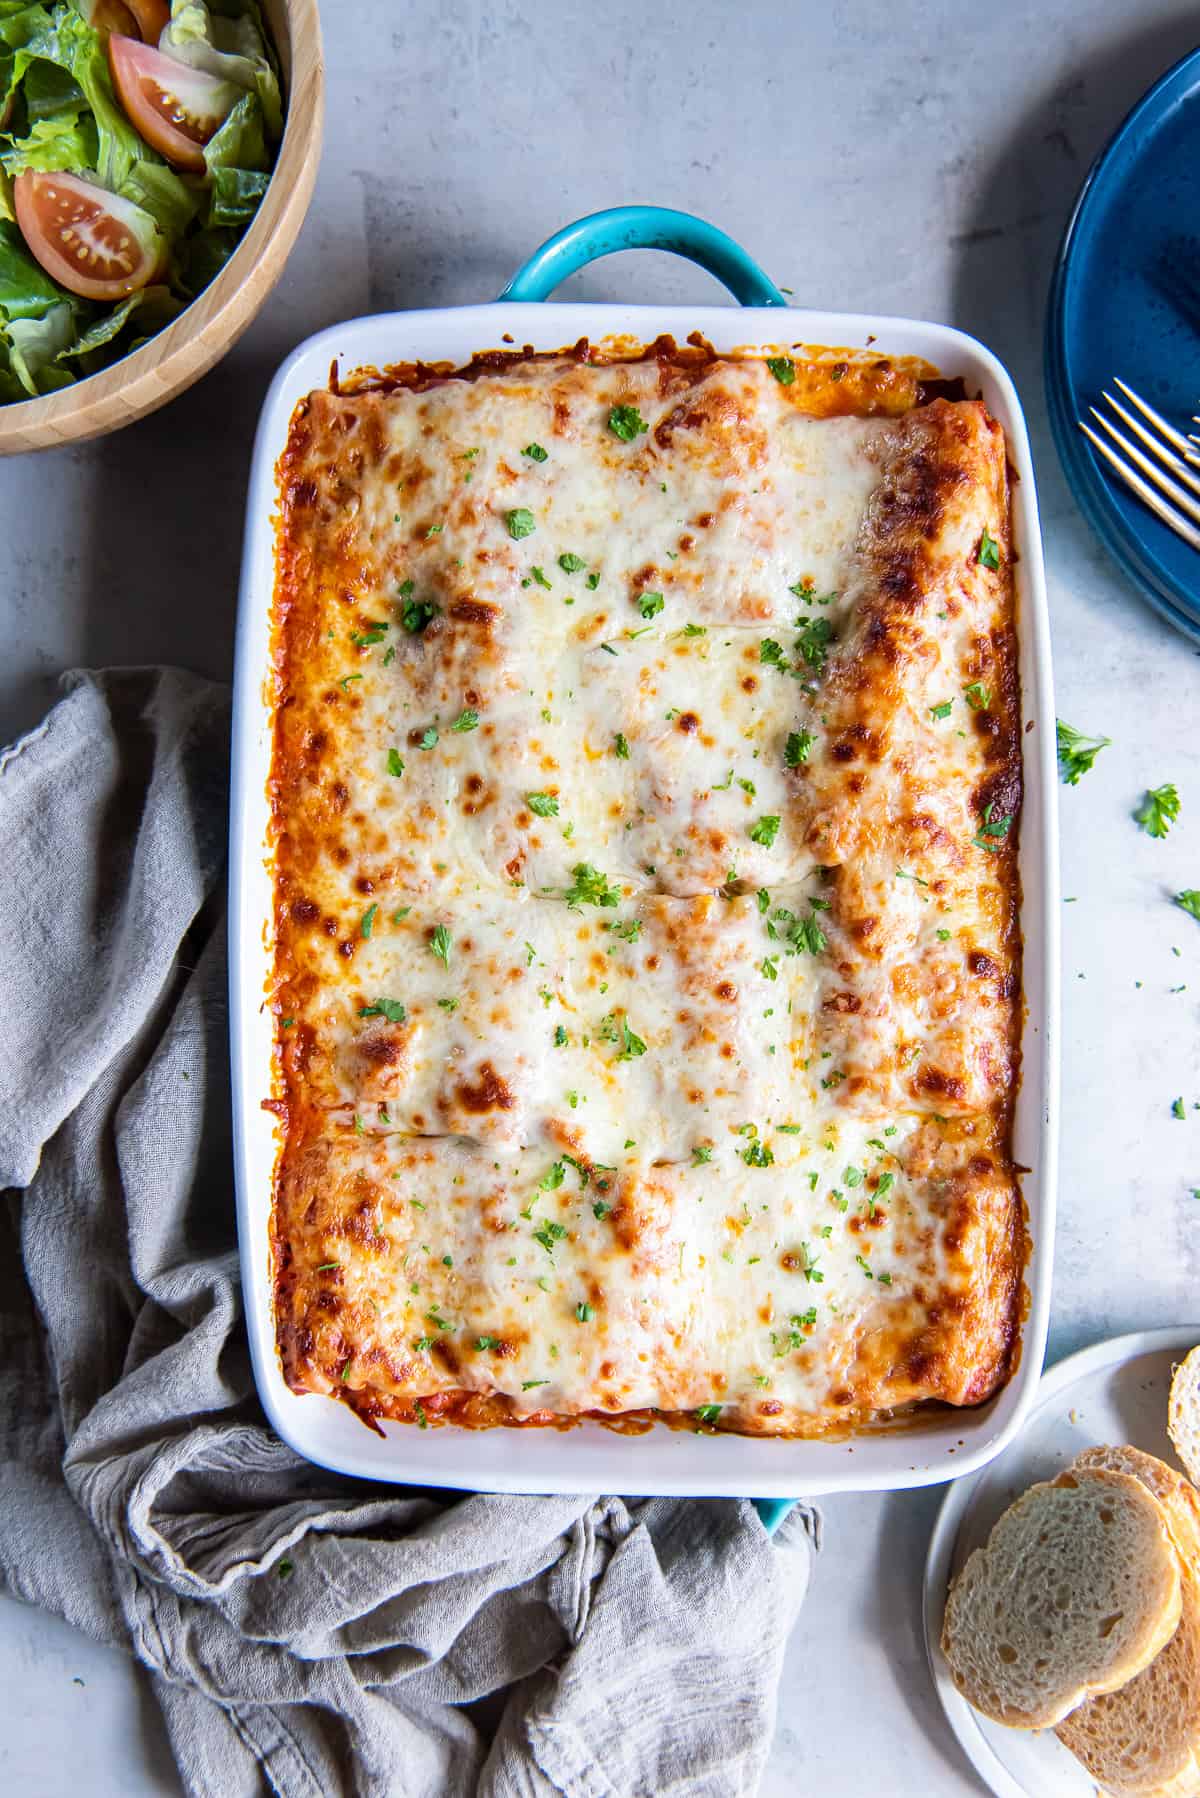 A top down shot of lasagna rollups topped with sauce and melted cheese i a baking dish next to a green salad and slices of bread.